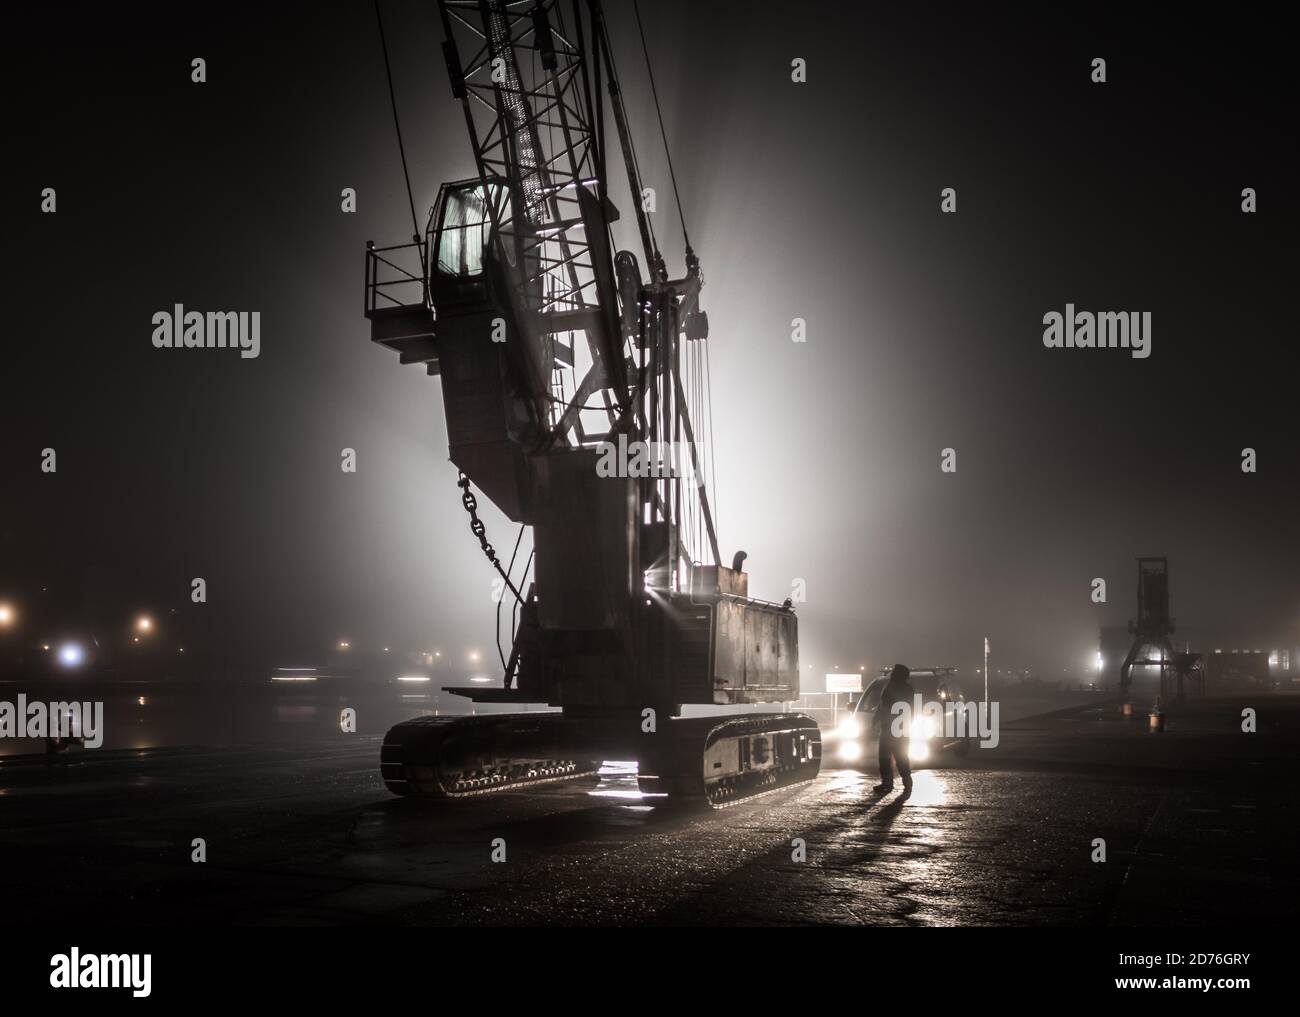 Cork City, Cork, Ireland. 21st October, 2020. Steven McCarthy of Doyle Shipping checks his crane before starting work on a foggy morning at the docks on Kennedy Quay in Cork City, Cork, Ireland. - Credit; David Creedon / Alamy Live News Stock Photo